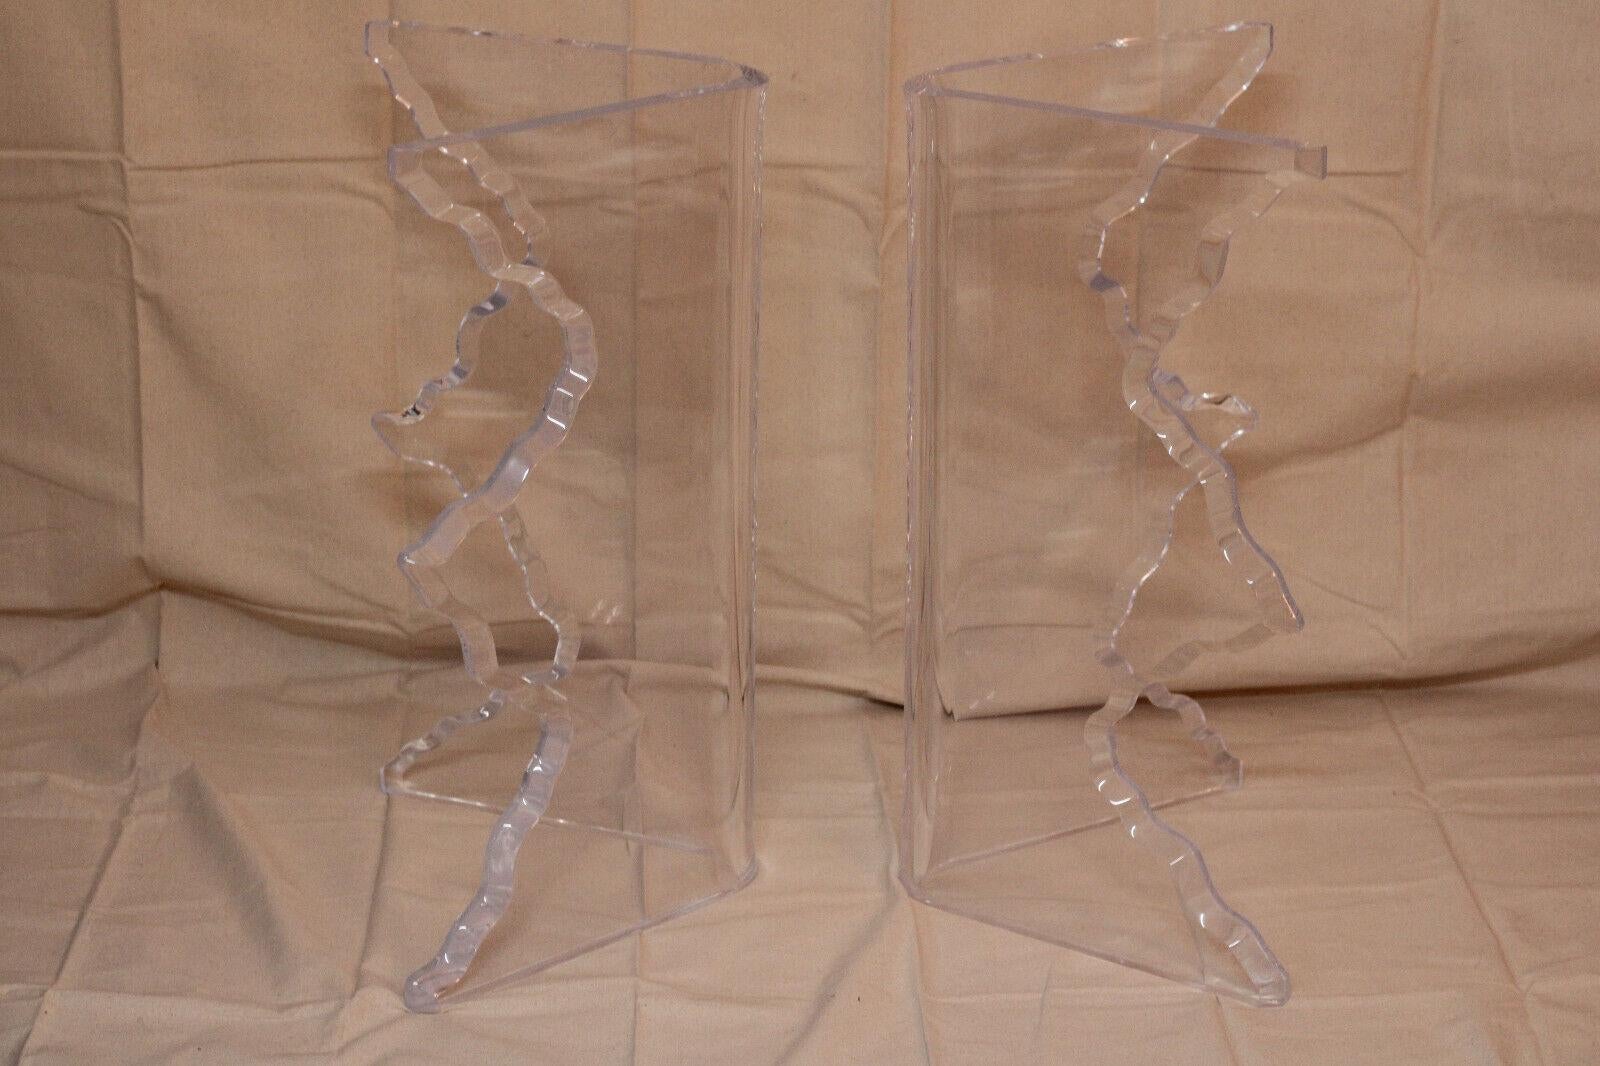 Fabulous vintage pair of 1970s era sculptural Lucite dining table bases in the Hollywood Regency or Mid-Century Modern style. Lucite has a natural transparency, providing a beautifully clean look, and it doesn’t add any visual clutter. These thick